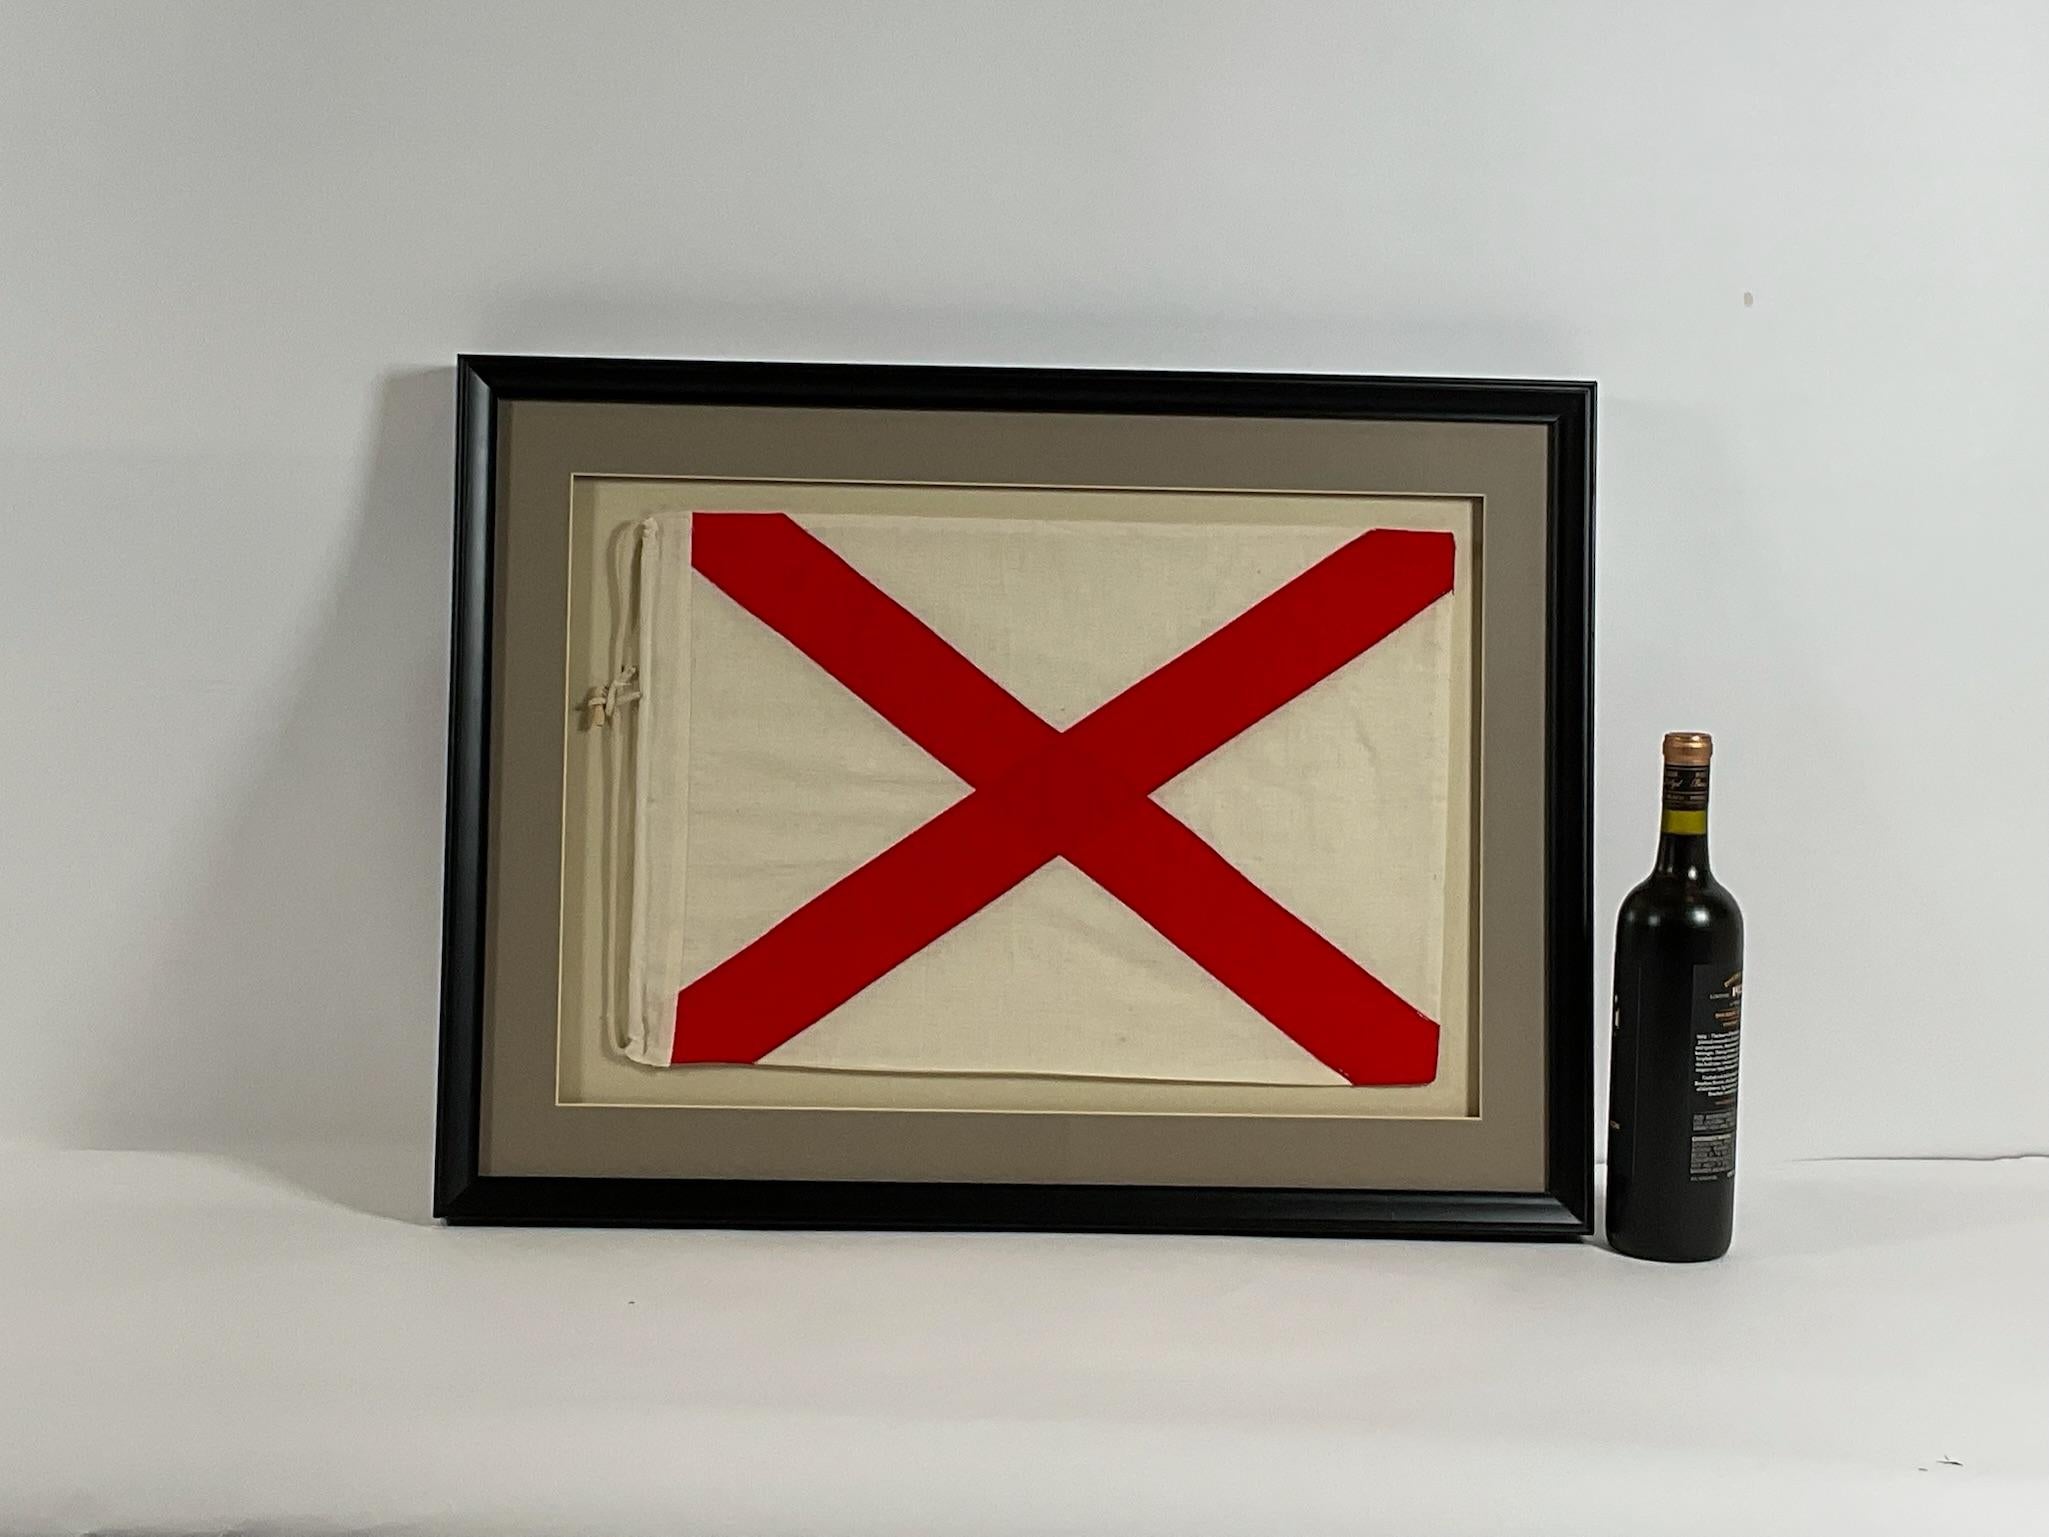 Maritime signal flag with rope and toggle fitted to a shadow box frame. White field with red X presenting the letter V for Victor. When raised, this flag symbols 